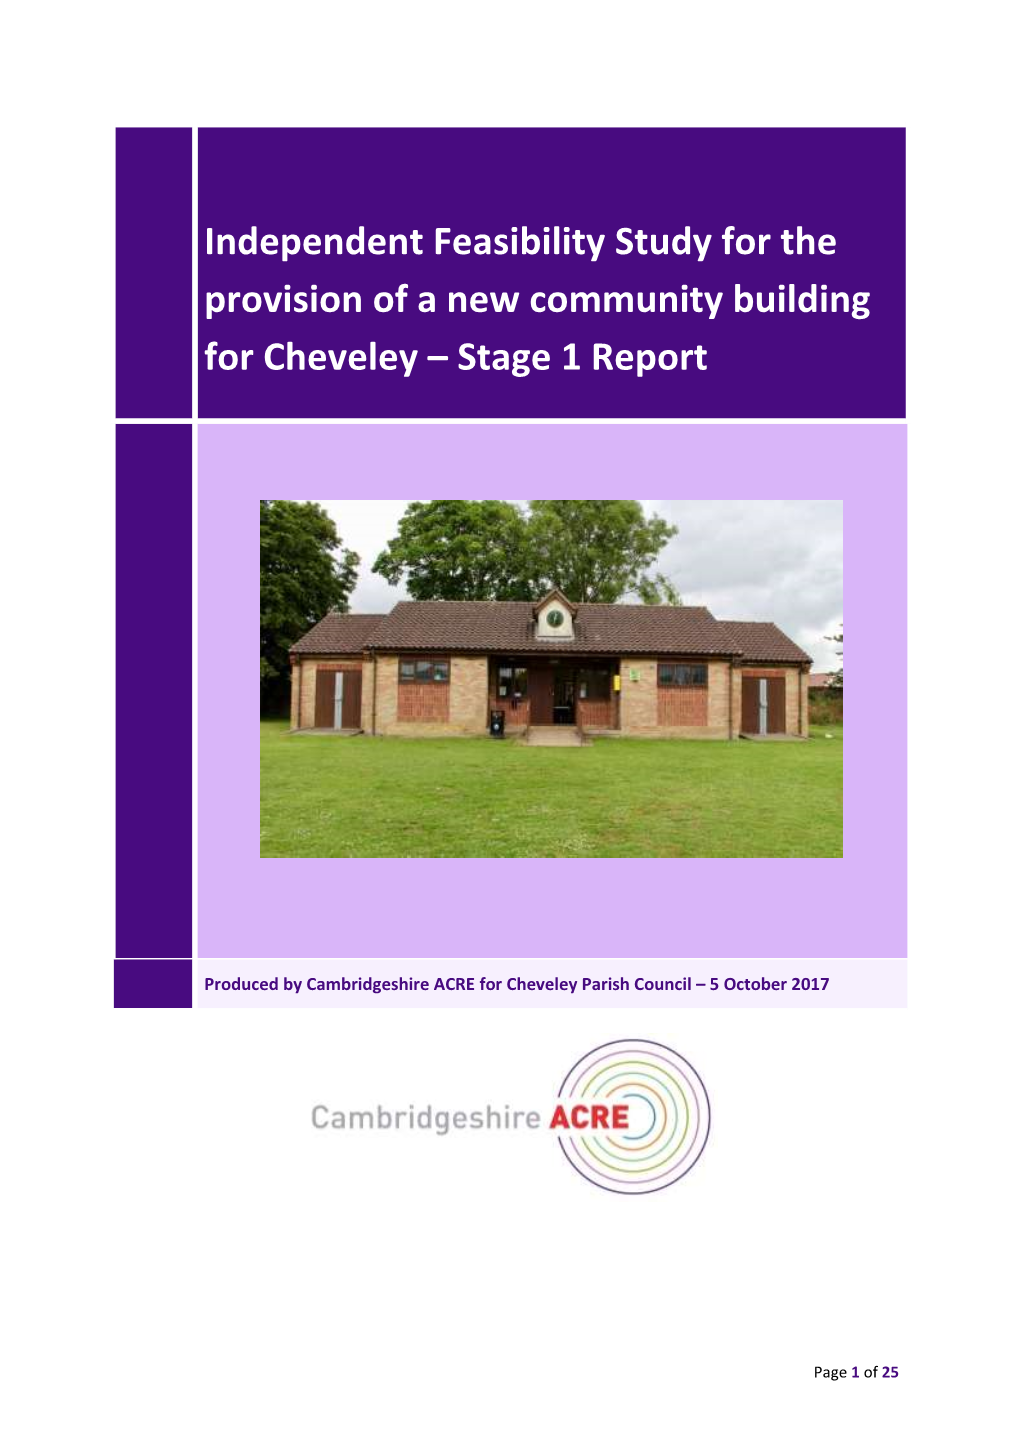 Independent Feasibility Study for the Provision of a New Community Building for Cheveley – Stage 1 Report